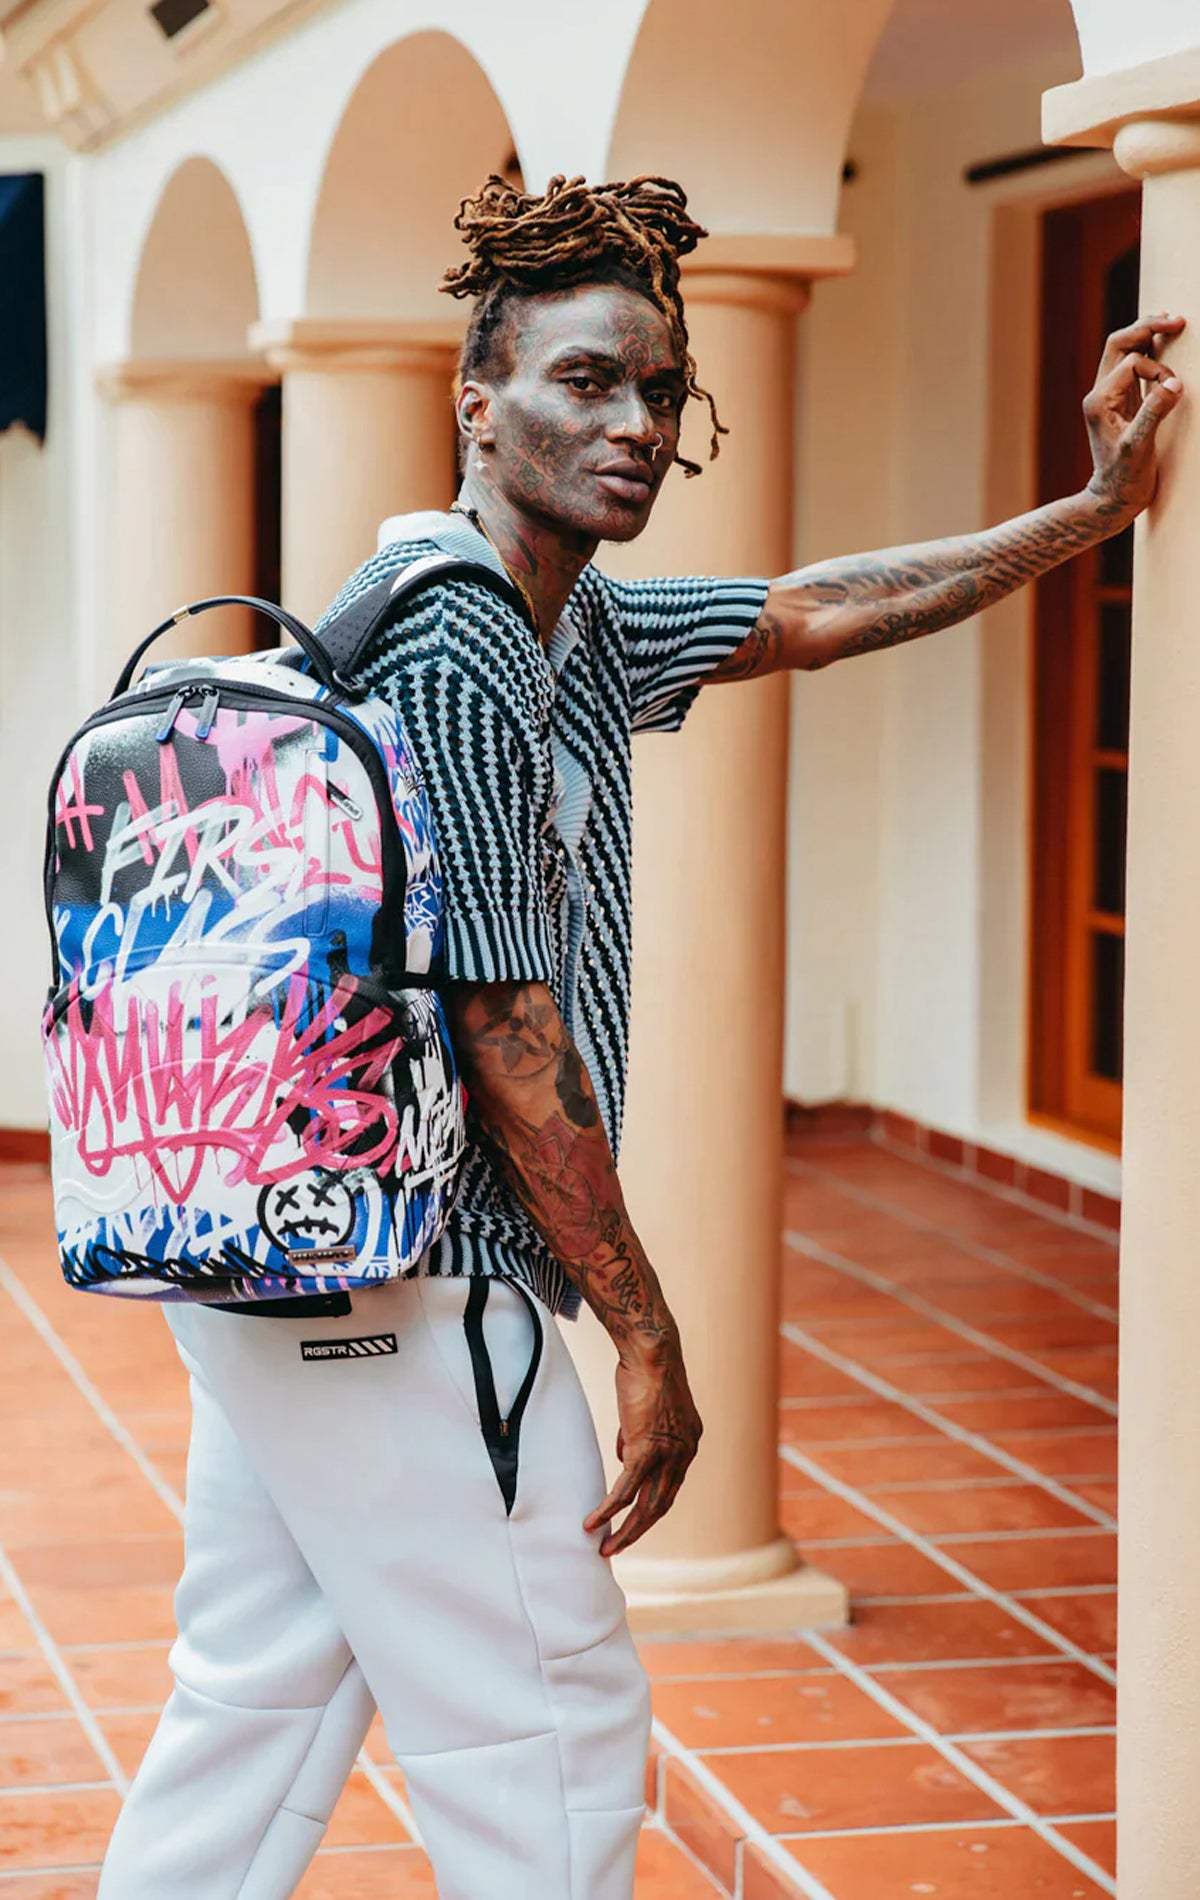 Colorful Sprayground backpack with the iconic Vandal Couture design. Features multiple compartments including a separate velour laptop compartment, side pockets, and a hidden zippered pocket.   Equipped with ergonomic mesh back padding, adjustable straps, and a sliding back sleeve for attaching to carry-on luggage. Made from durable vegan leather.